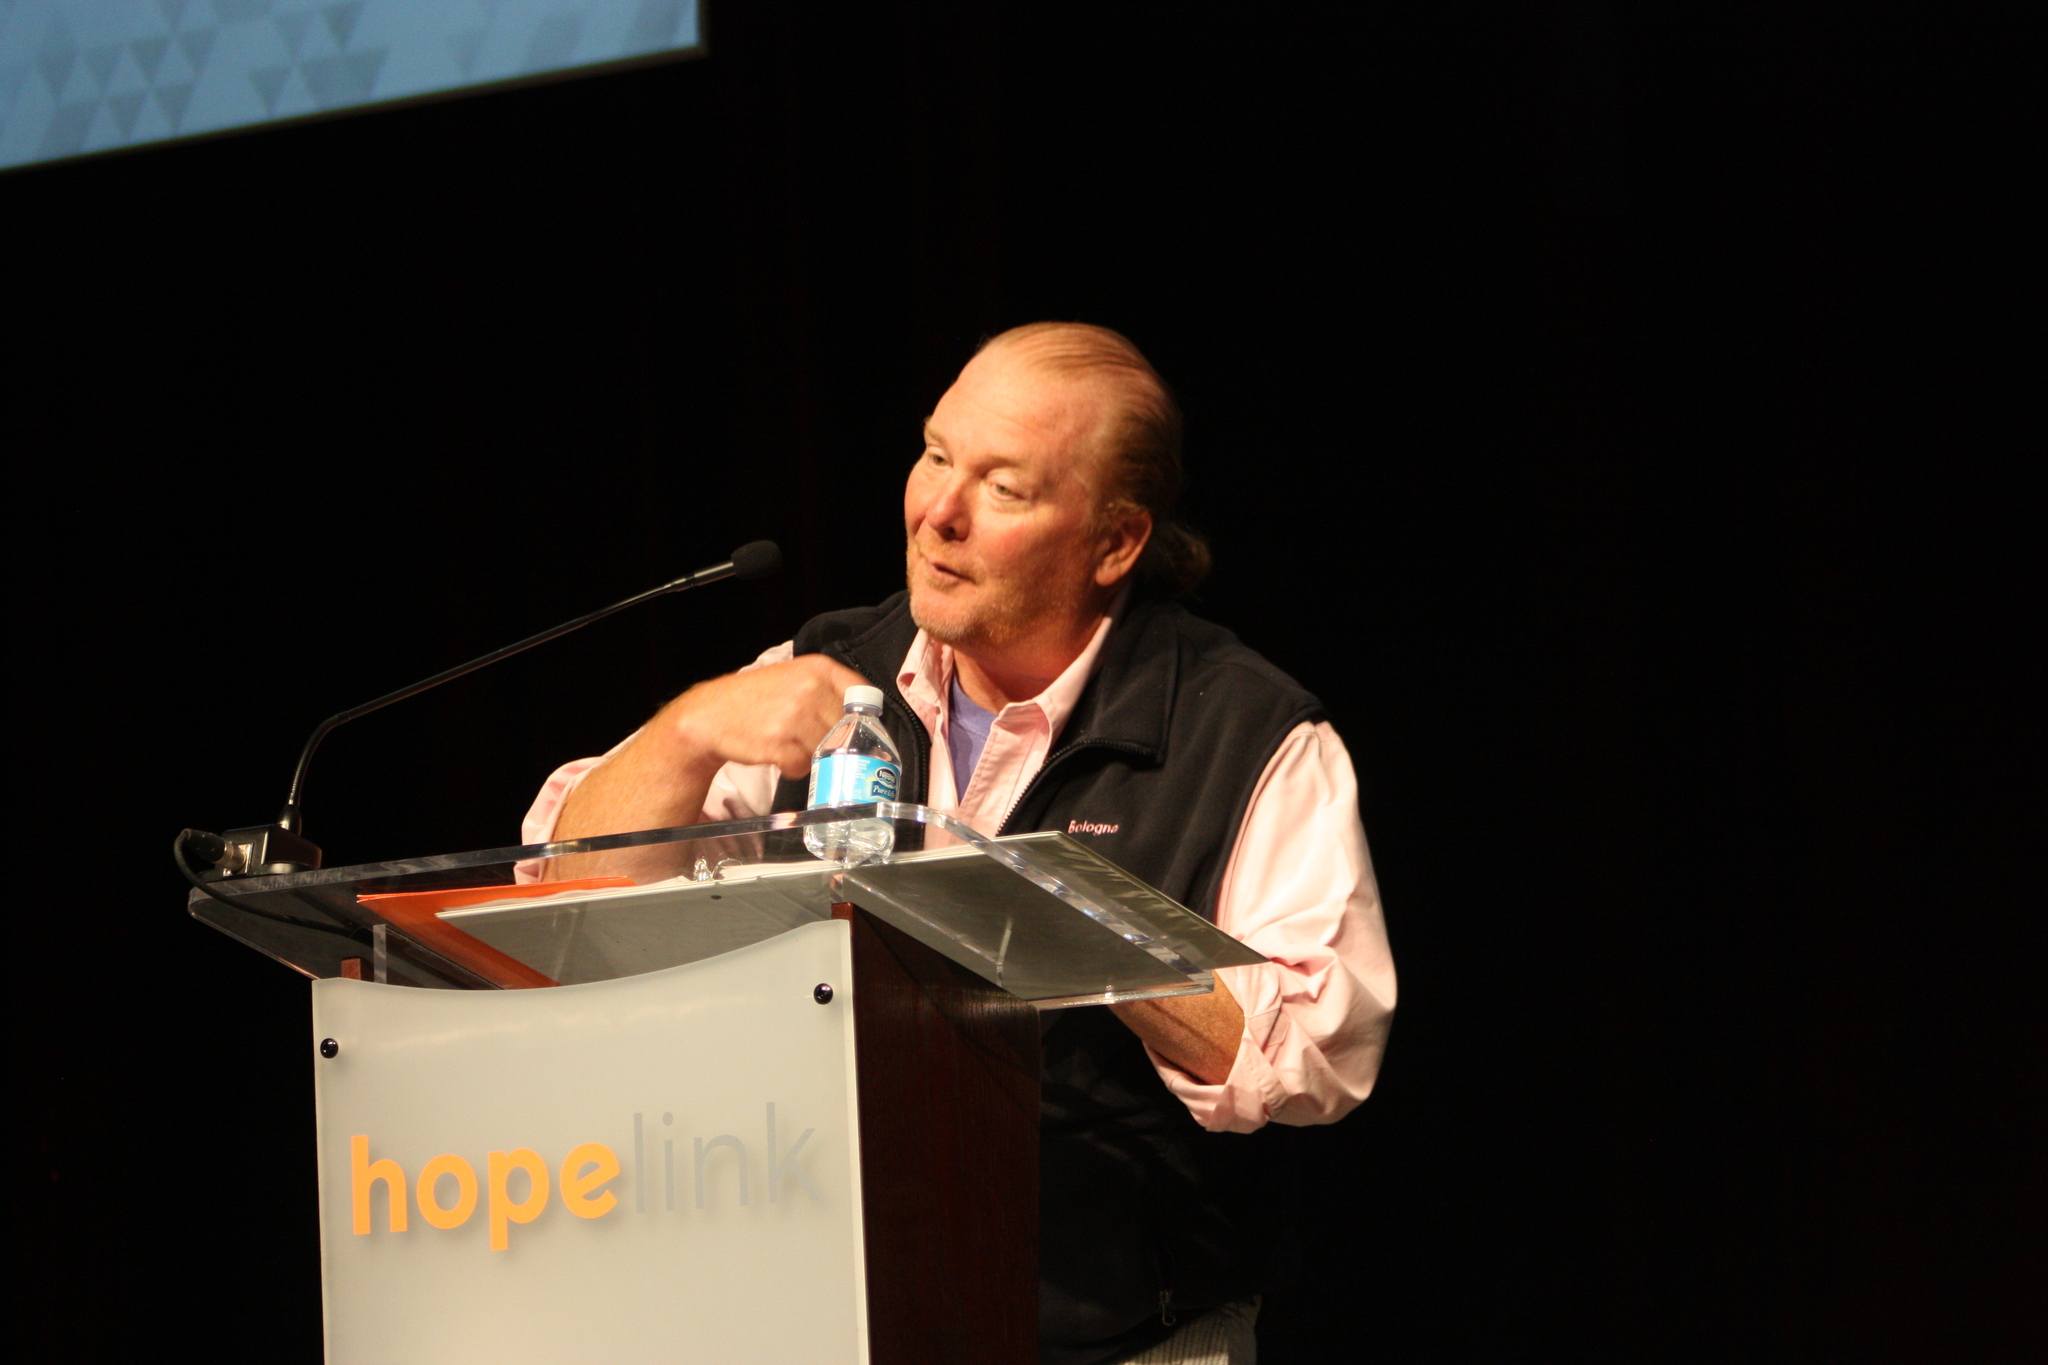 Chef and Seattle-area native Mario Batali shares one of many food-related stories at Hopelink’s Reaching Out Luncheon on Monday at the Meydenbauer Convention Center in Bellevue. Samantha Pak